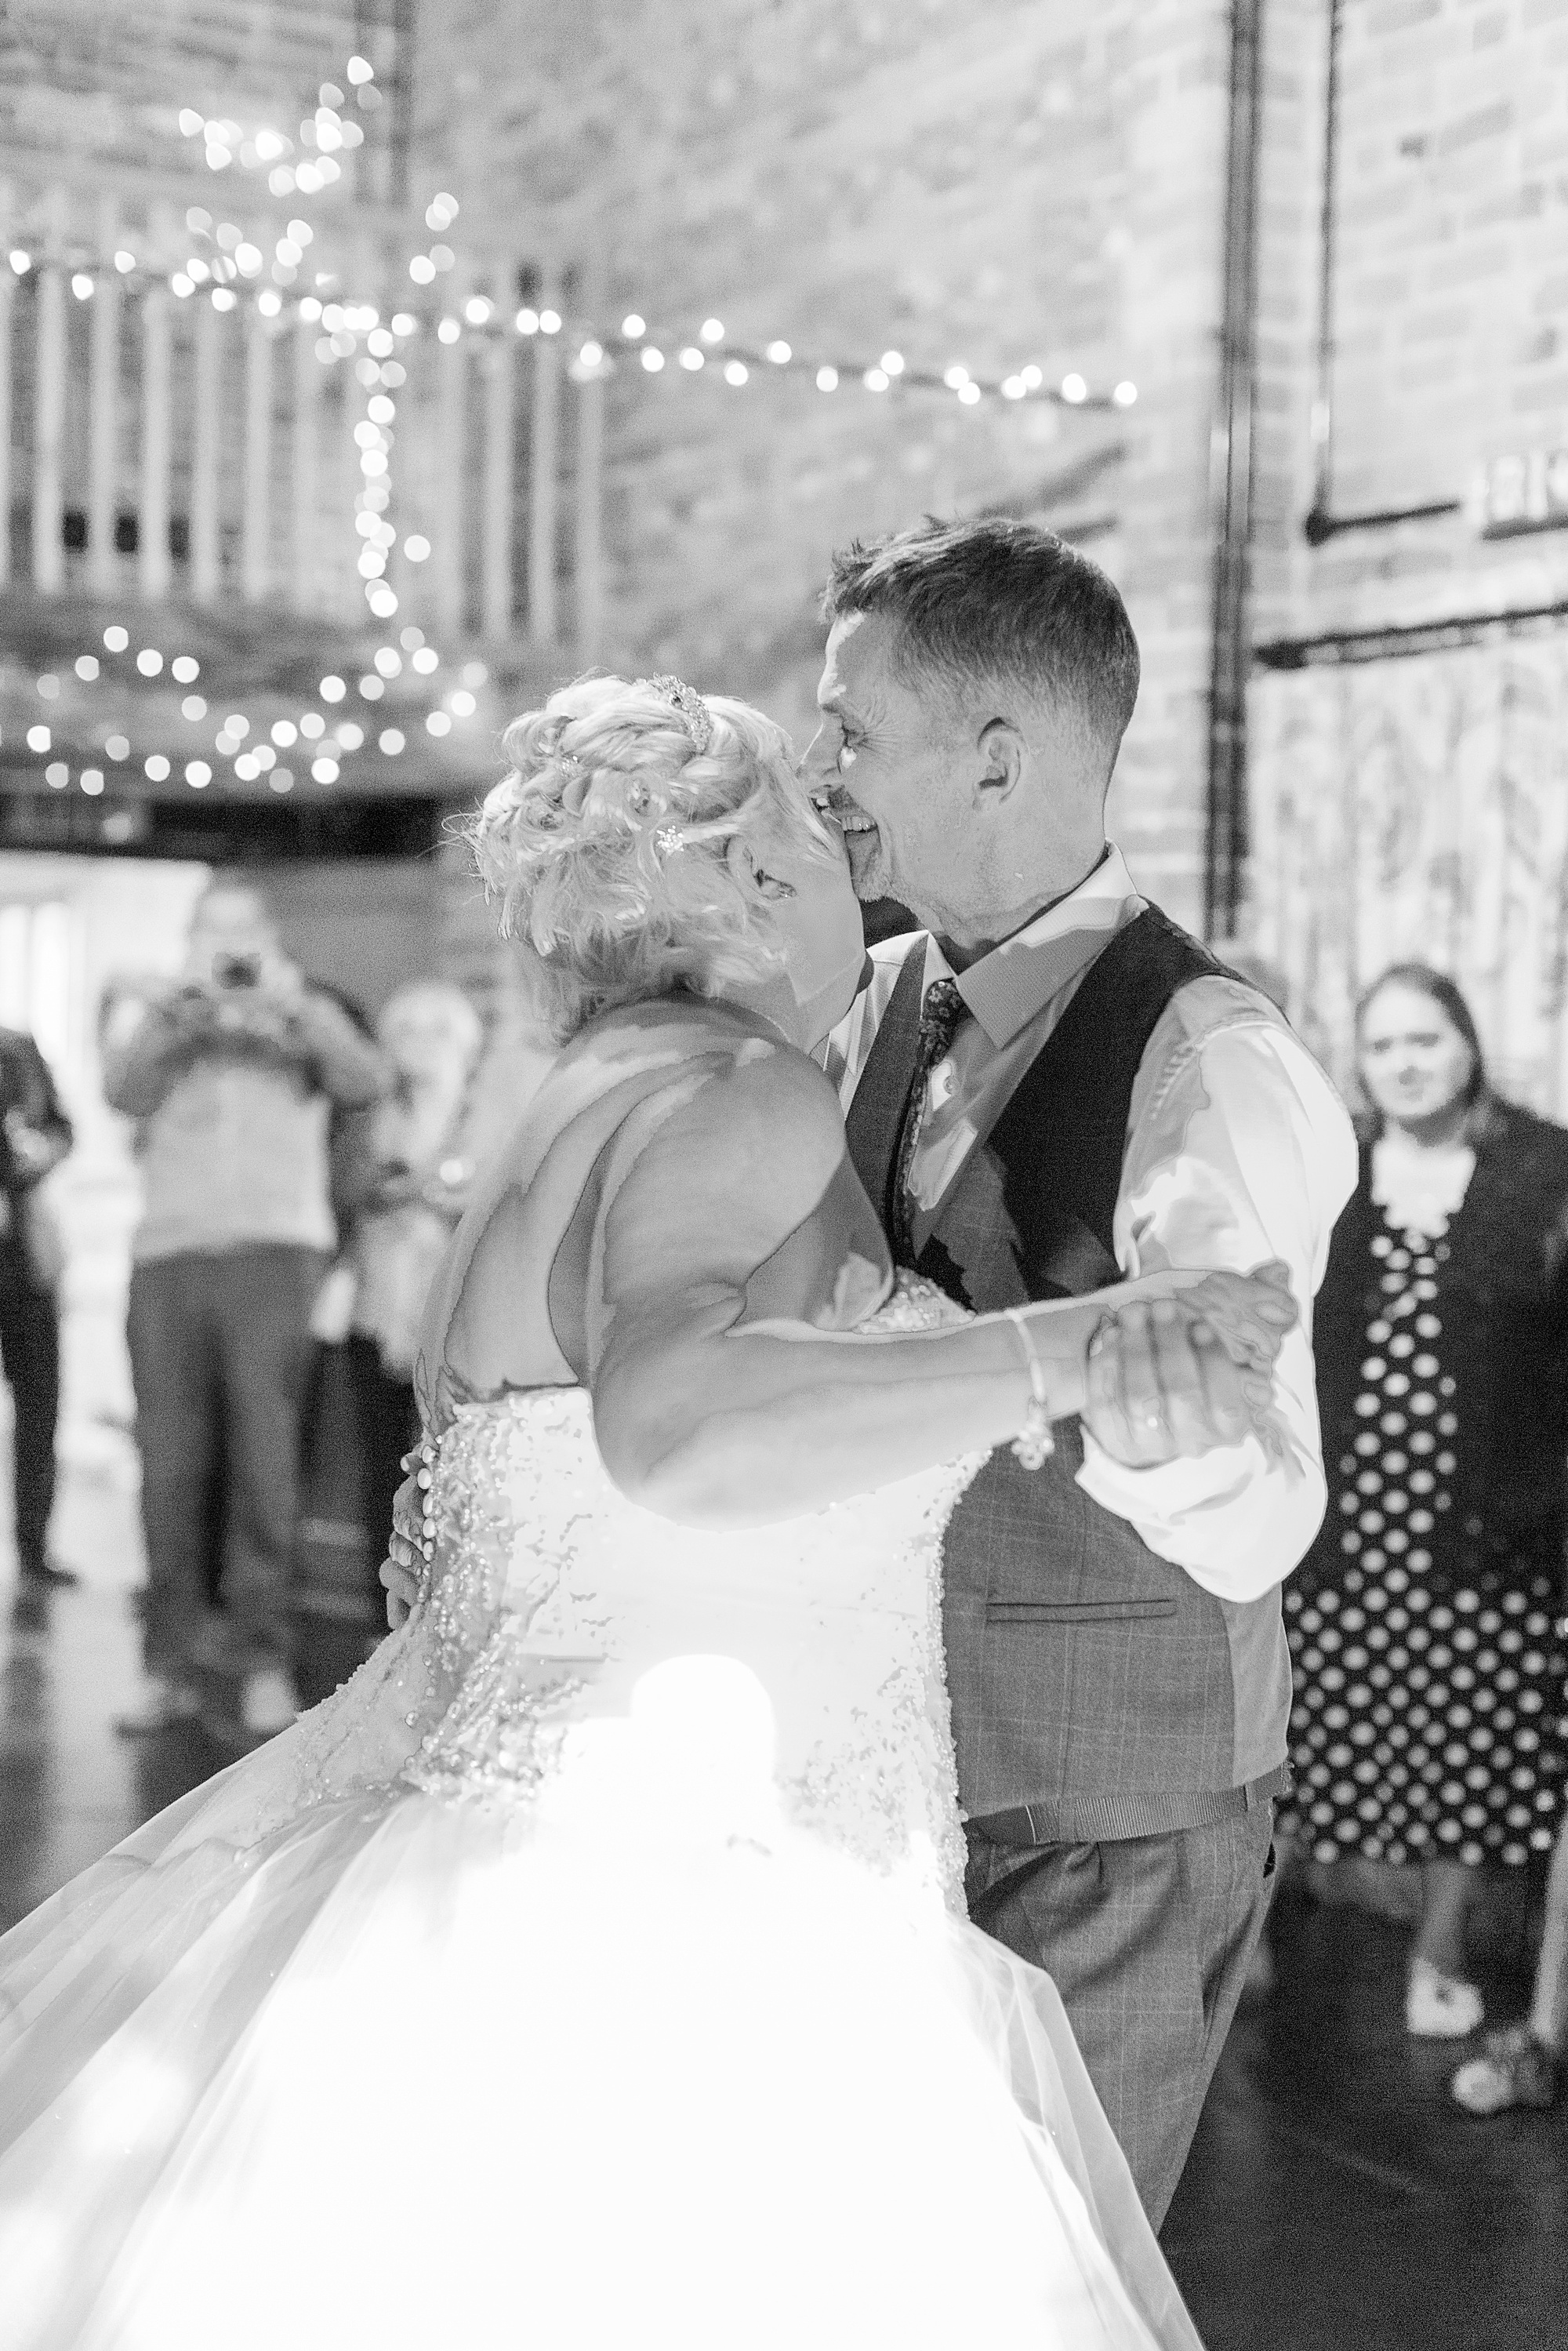 Photo of a bride and groom dancing their first dance at their wedding in a barn at curradine barns